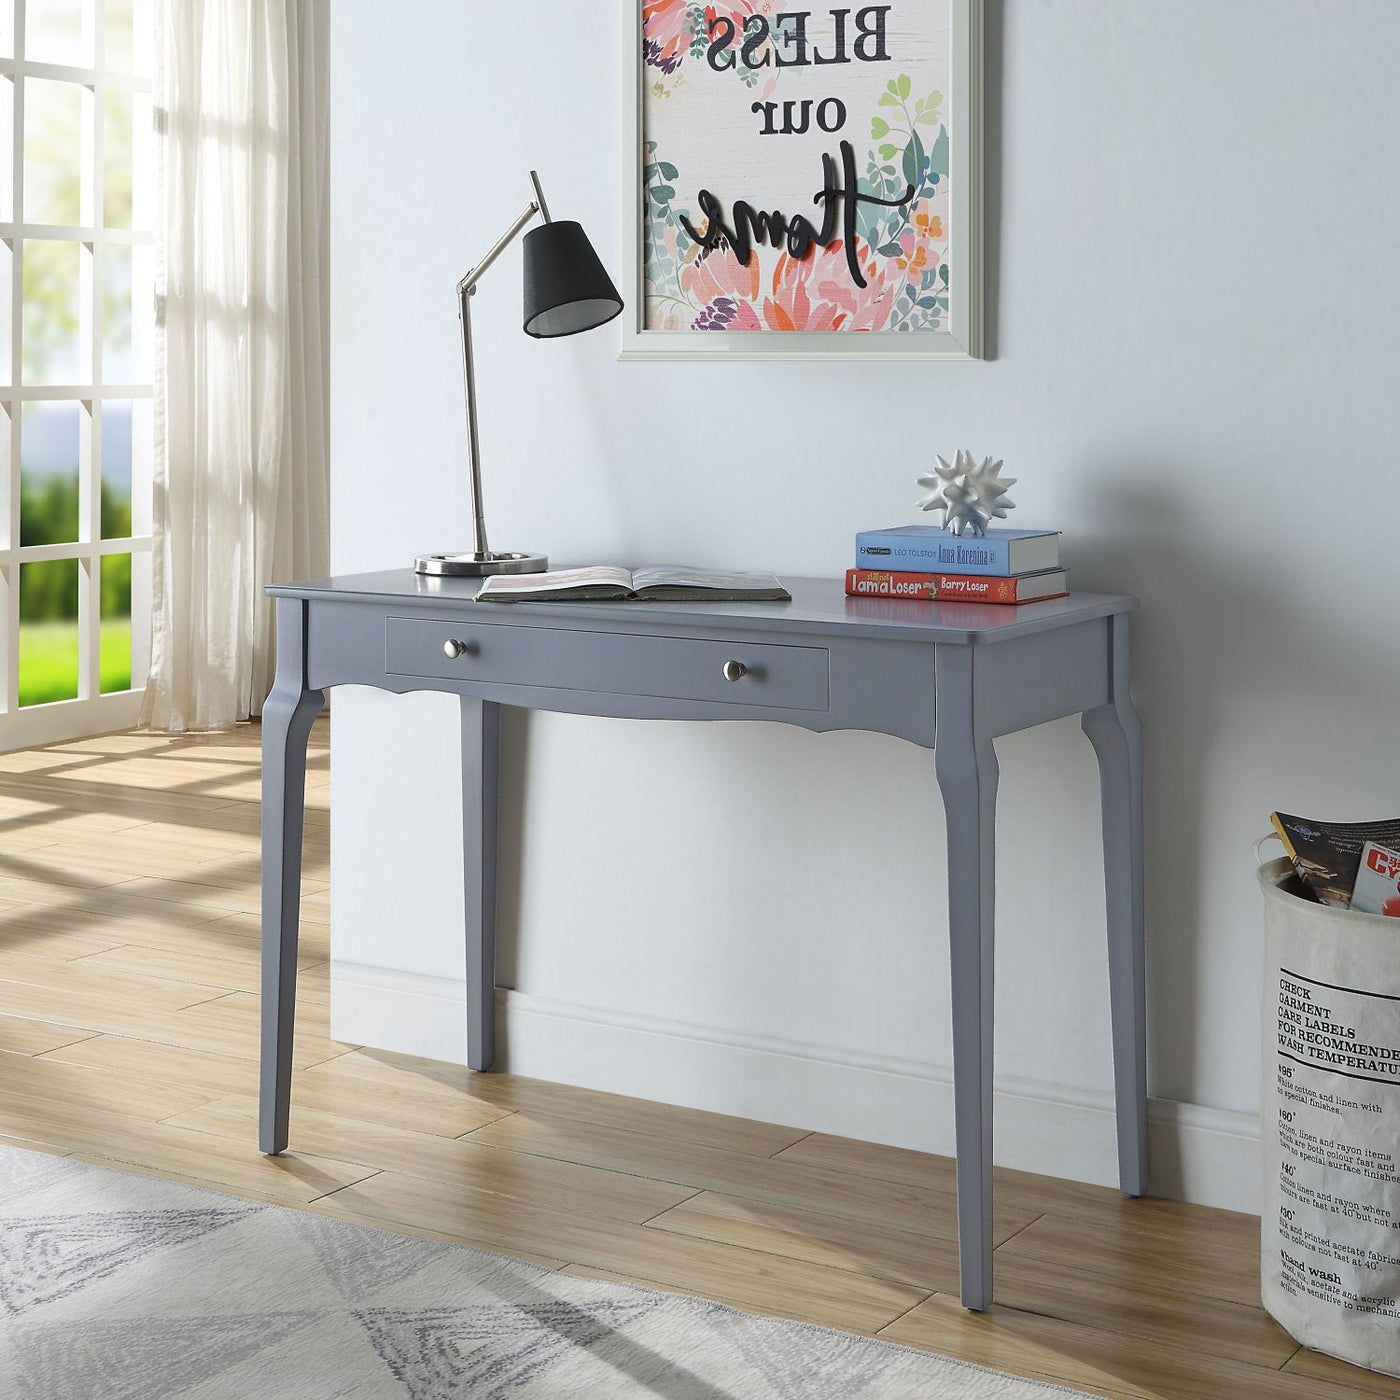 Olfus Office Desk/Console Table - Grey